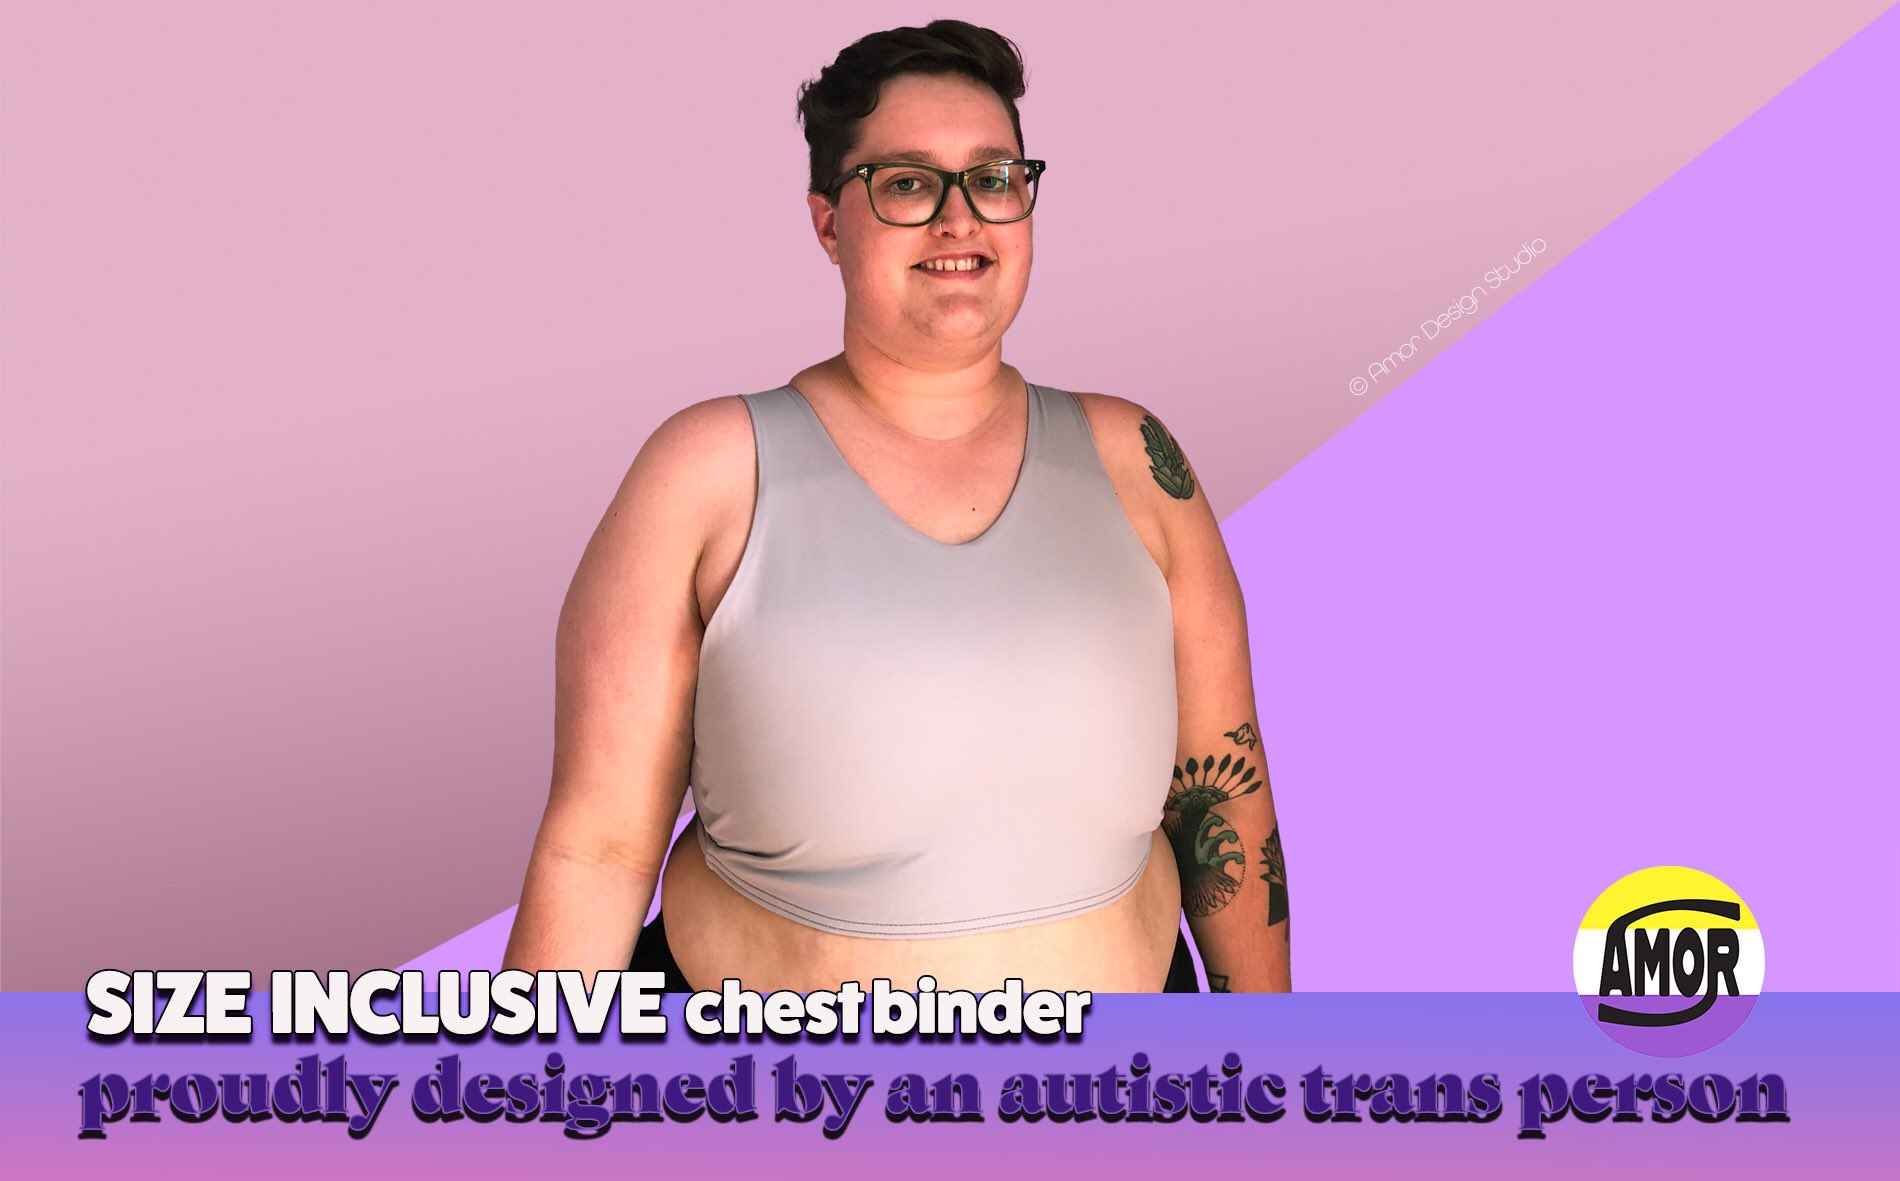 Binder review (with photos) - large(ish) chest with autistic sensory issues  : r/TransMasc